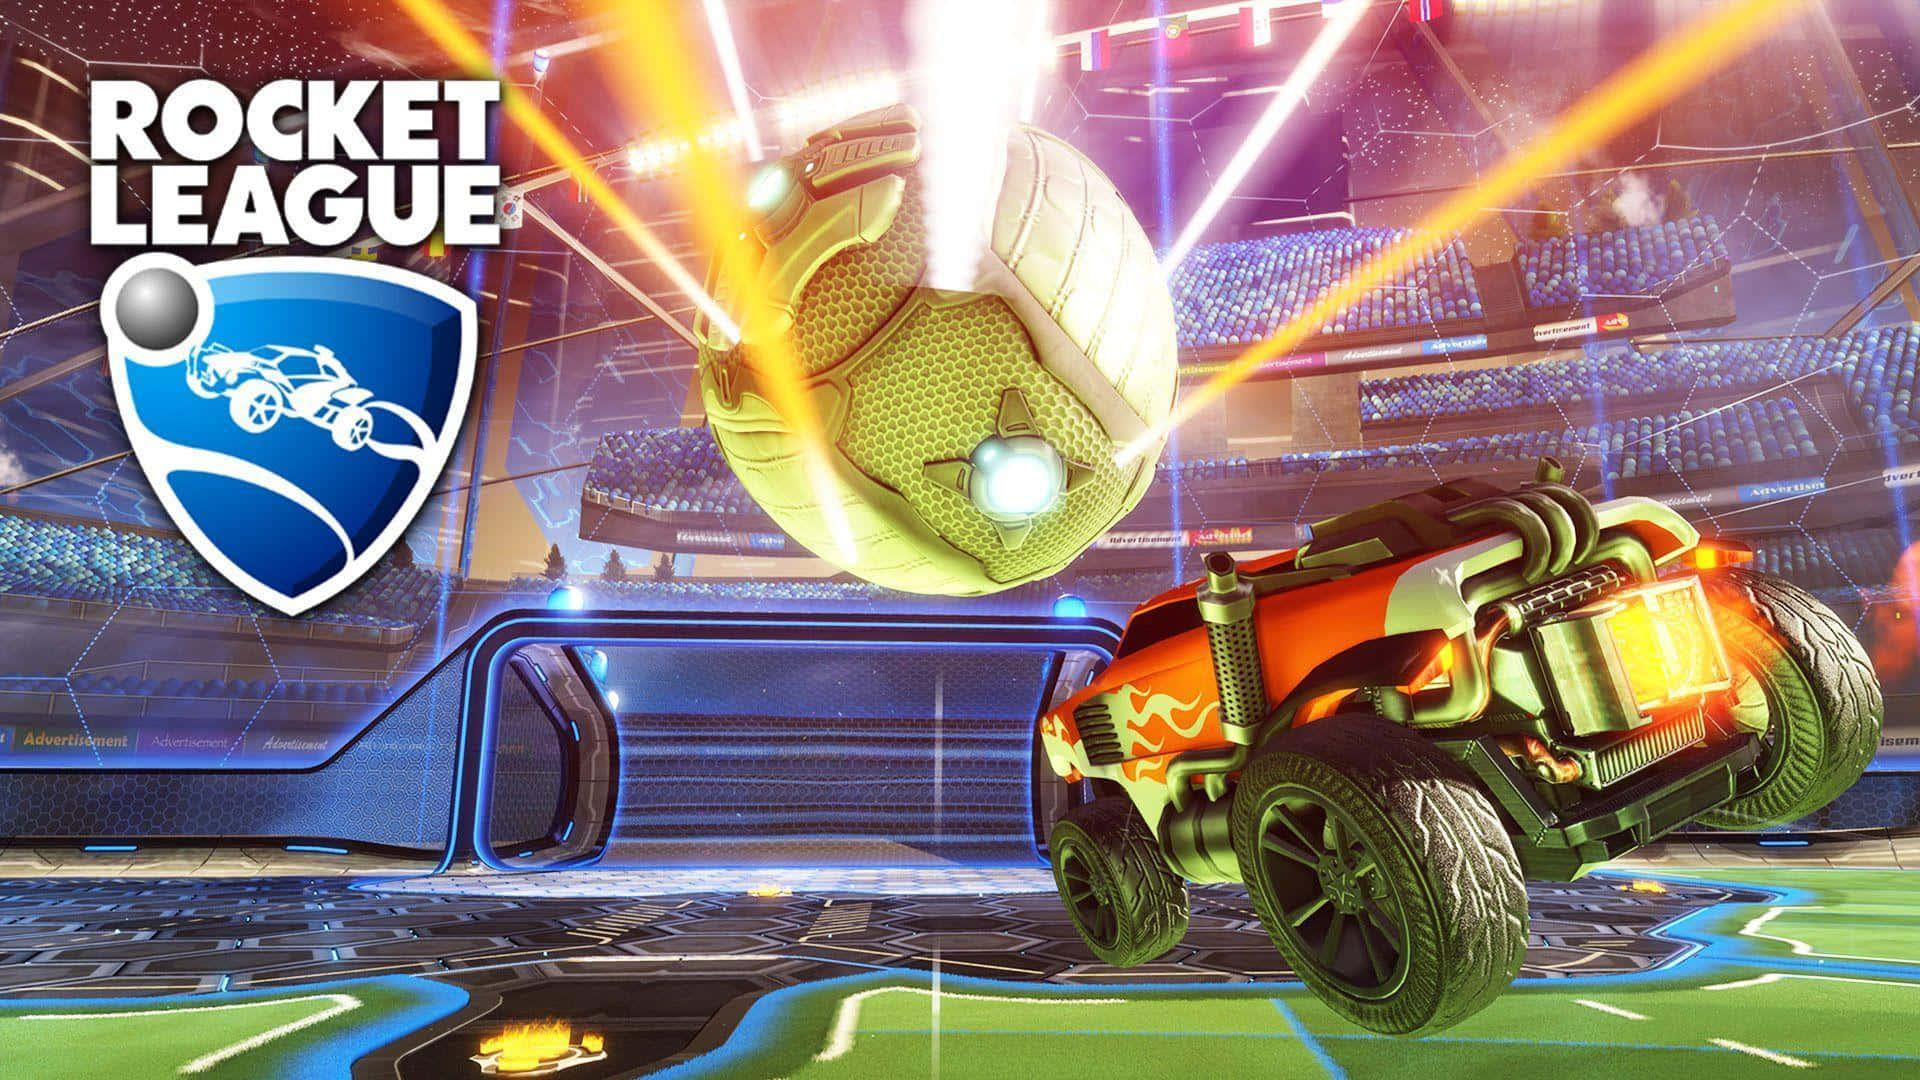 Rocket League: Reach exciting heights with passion and skill